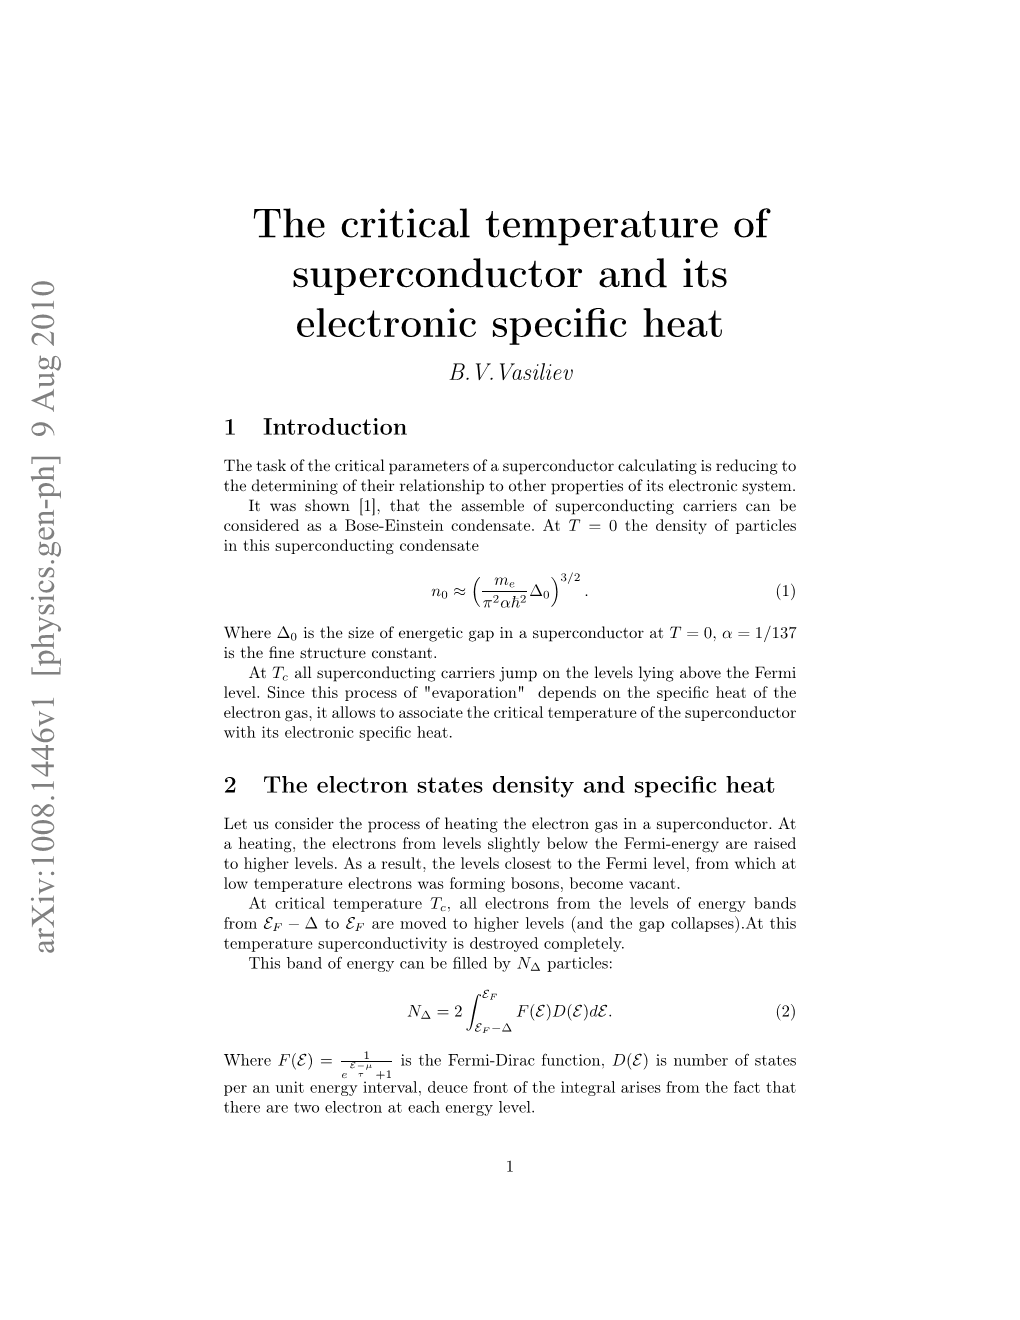 The Critical Temperature of Superconductor and Its Electronic